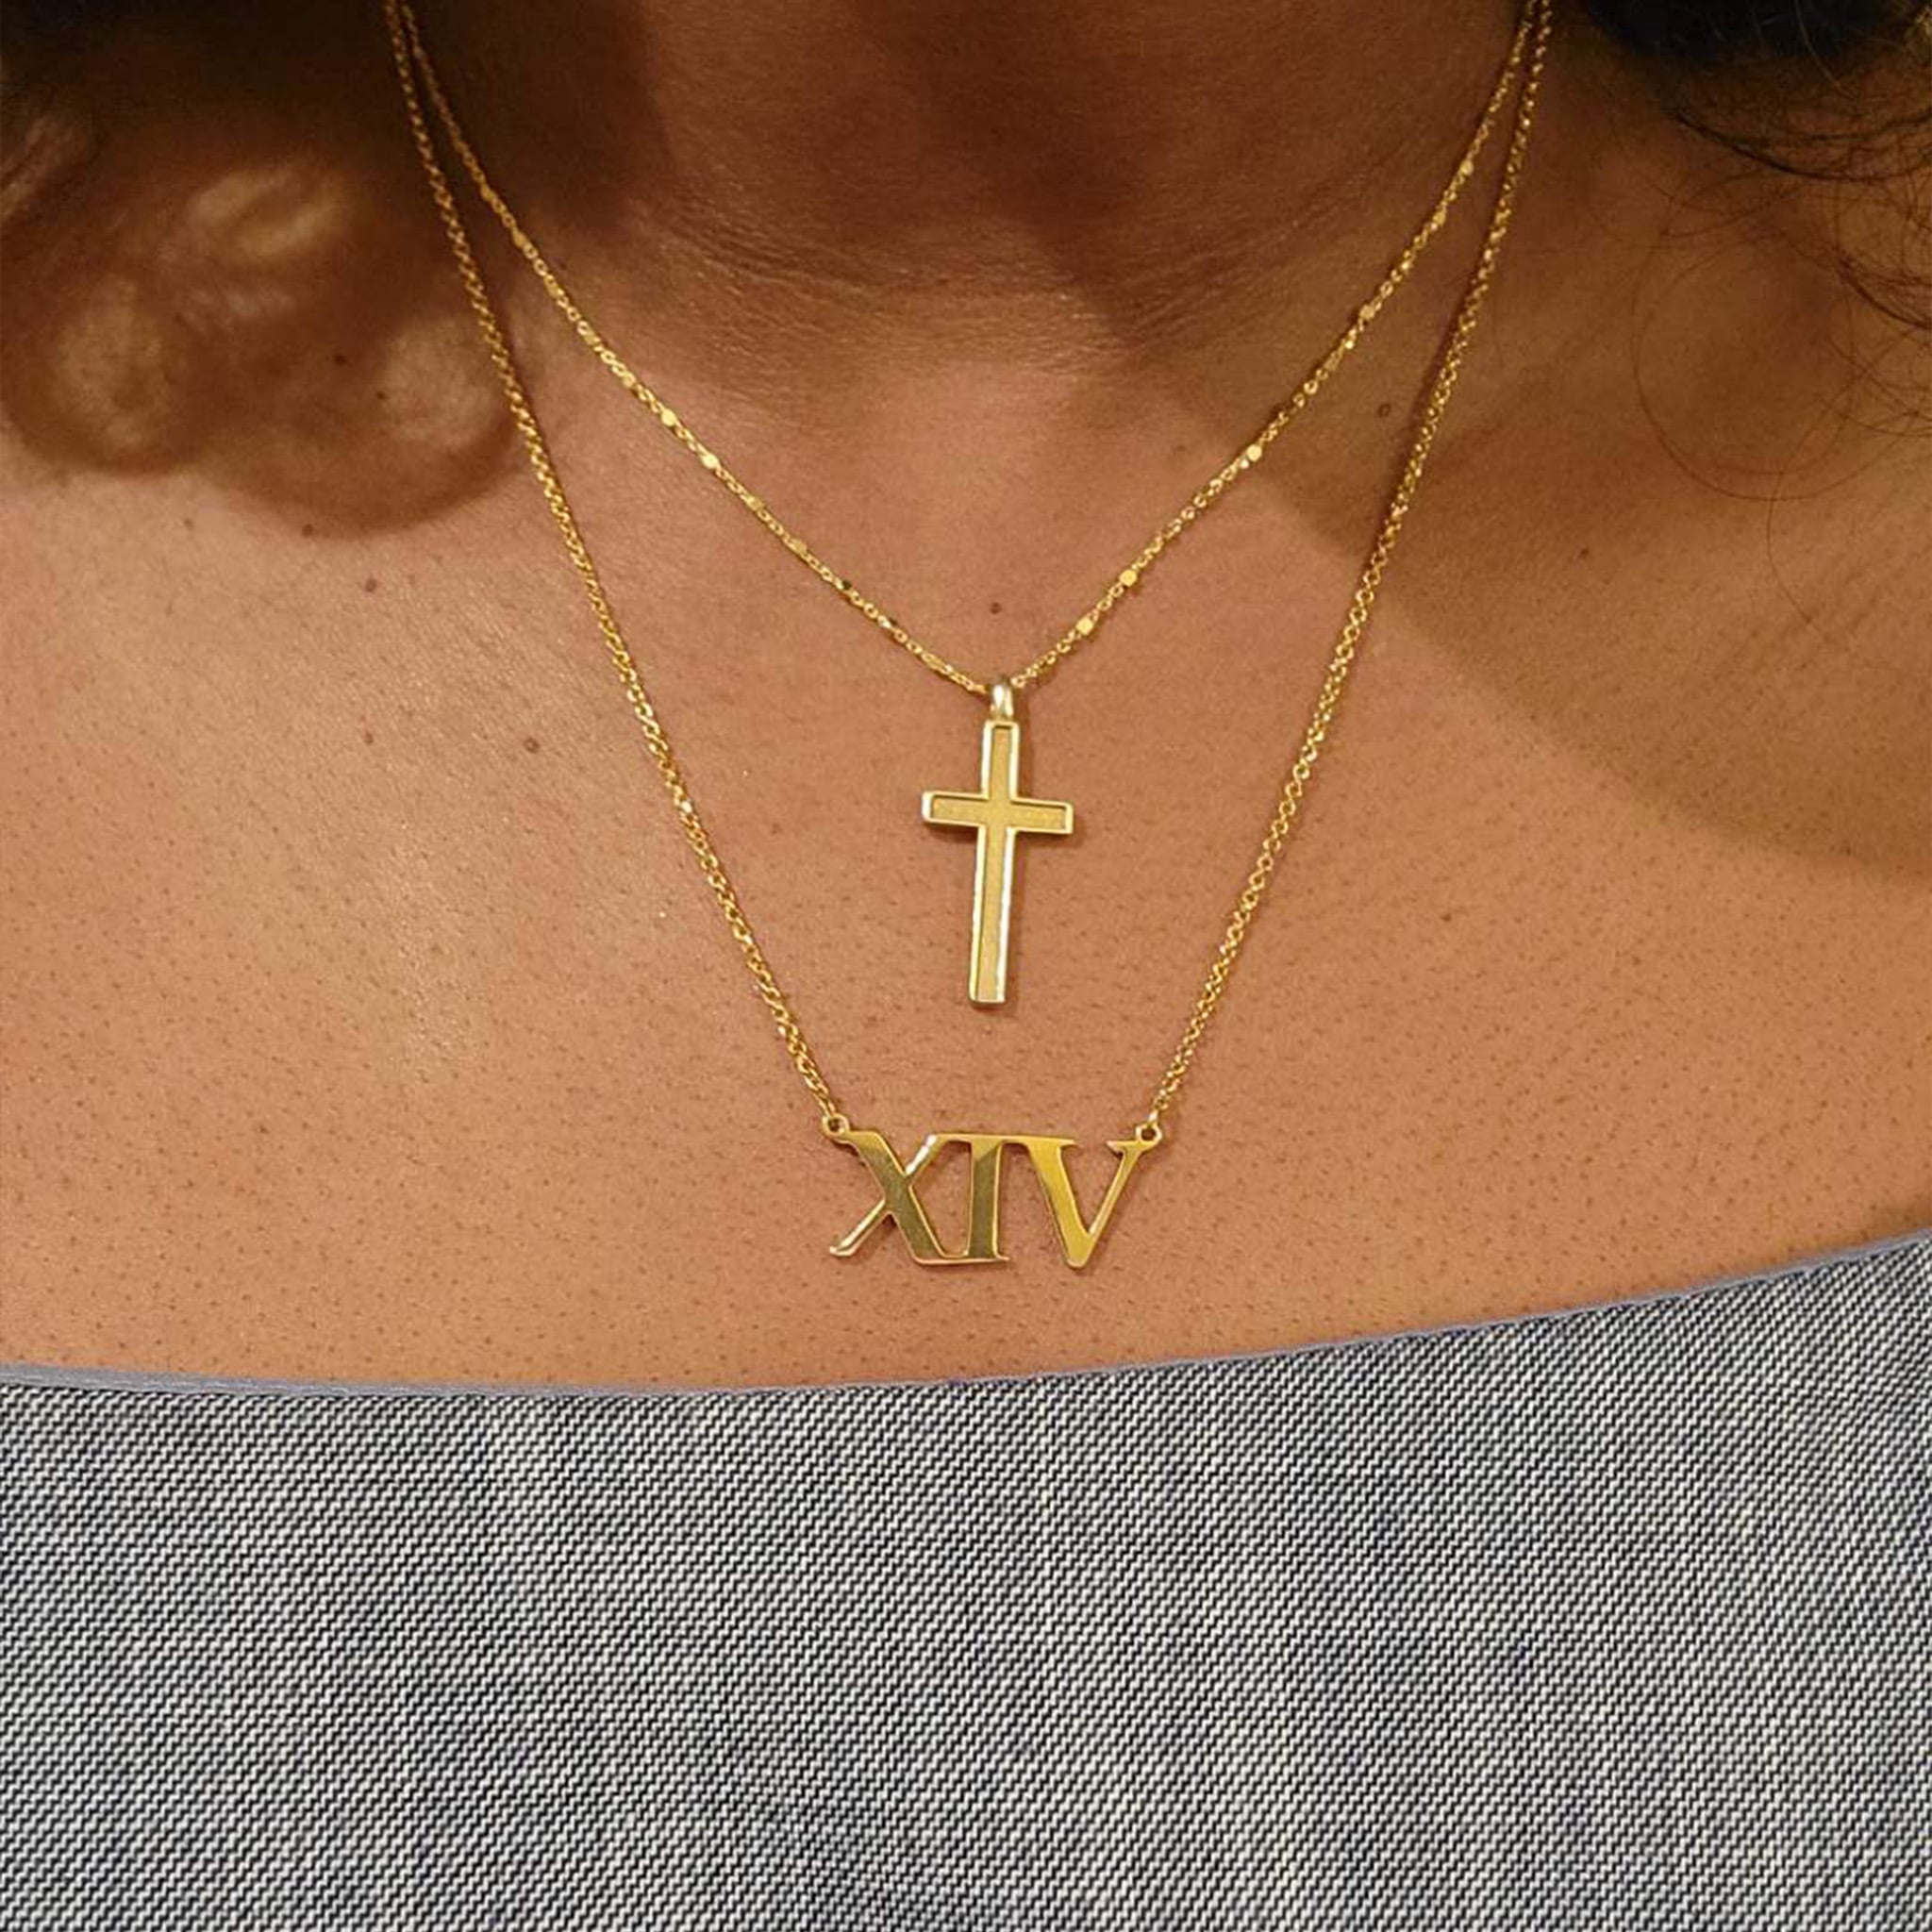 18k Yellow Gold Vermeil Cross Stacked with XIV Nameplate Necklace